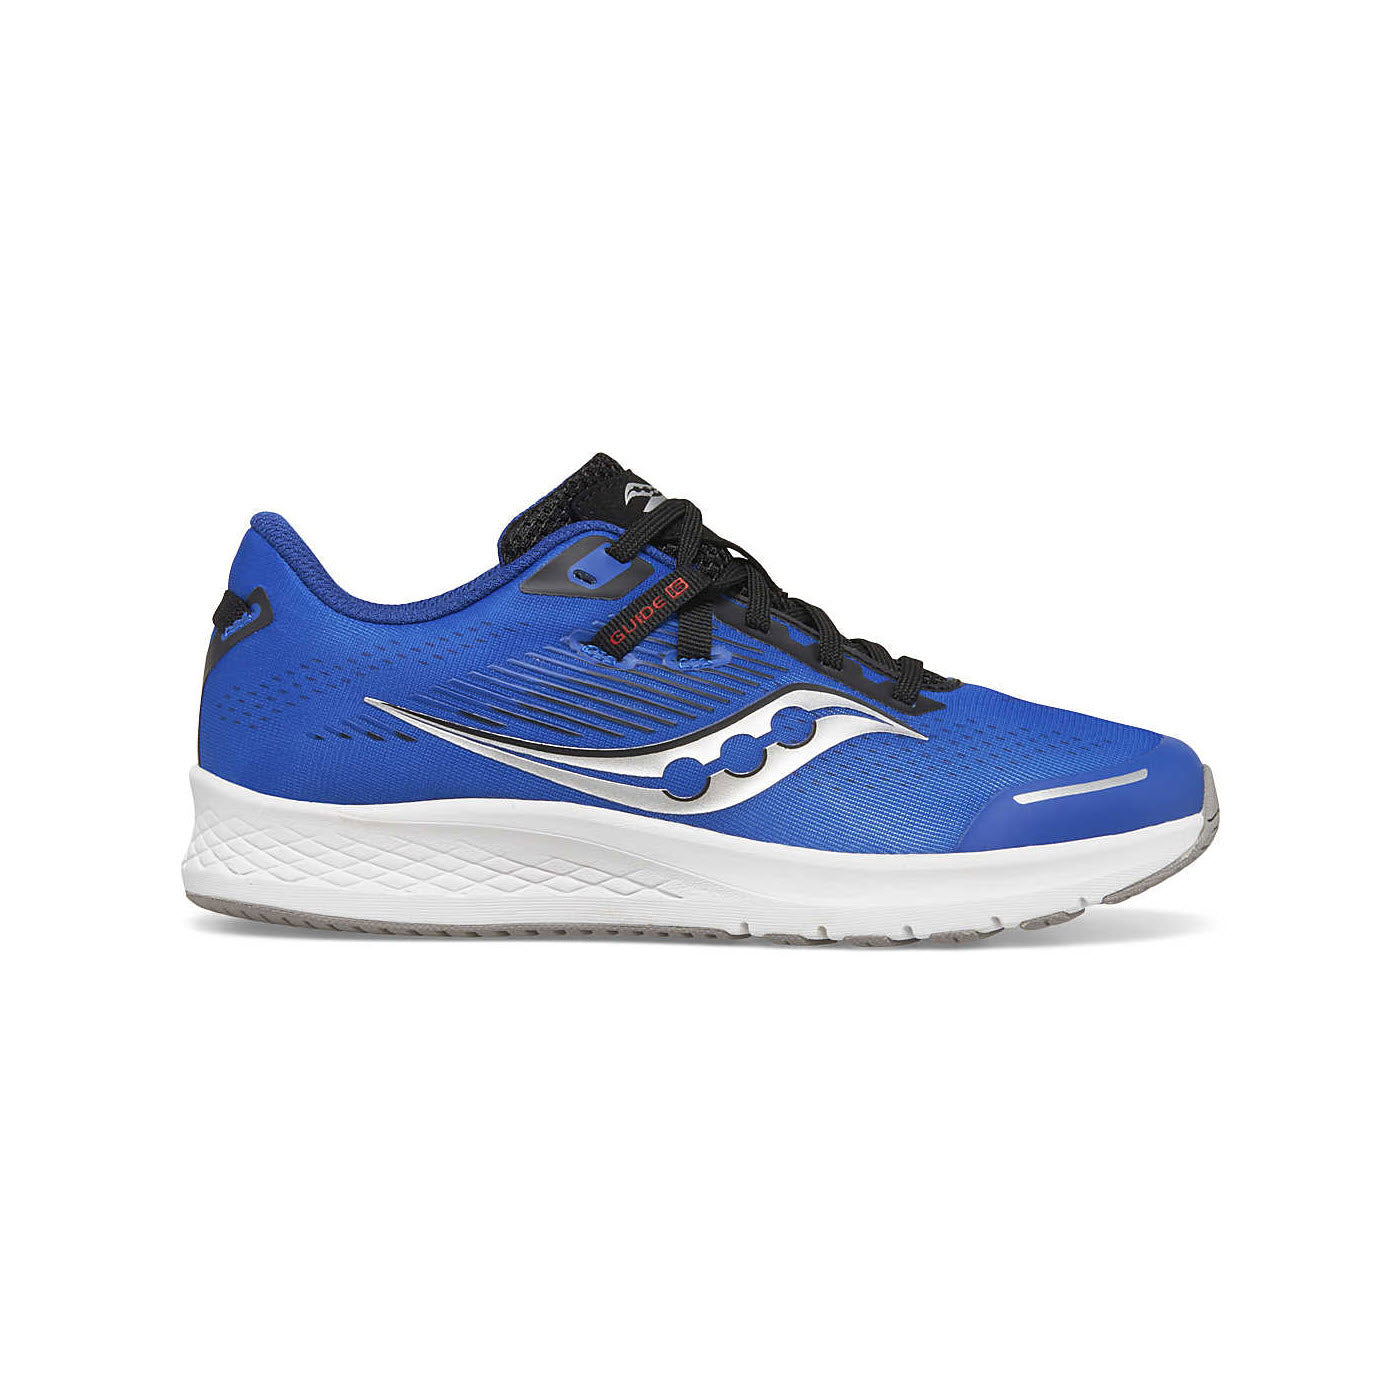 Replace with:
"Saucony Guide 16 blue/black running shoe with white sole and black laces, featuring the Saucony logo on the side and a contoured footbed.